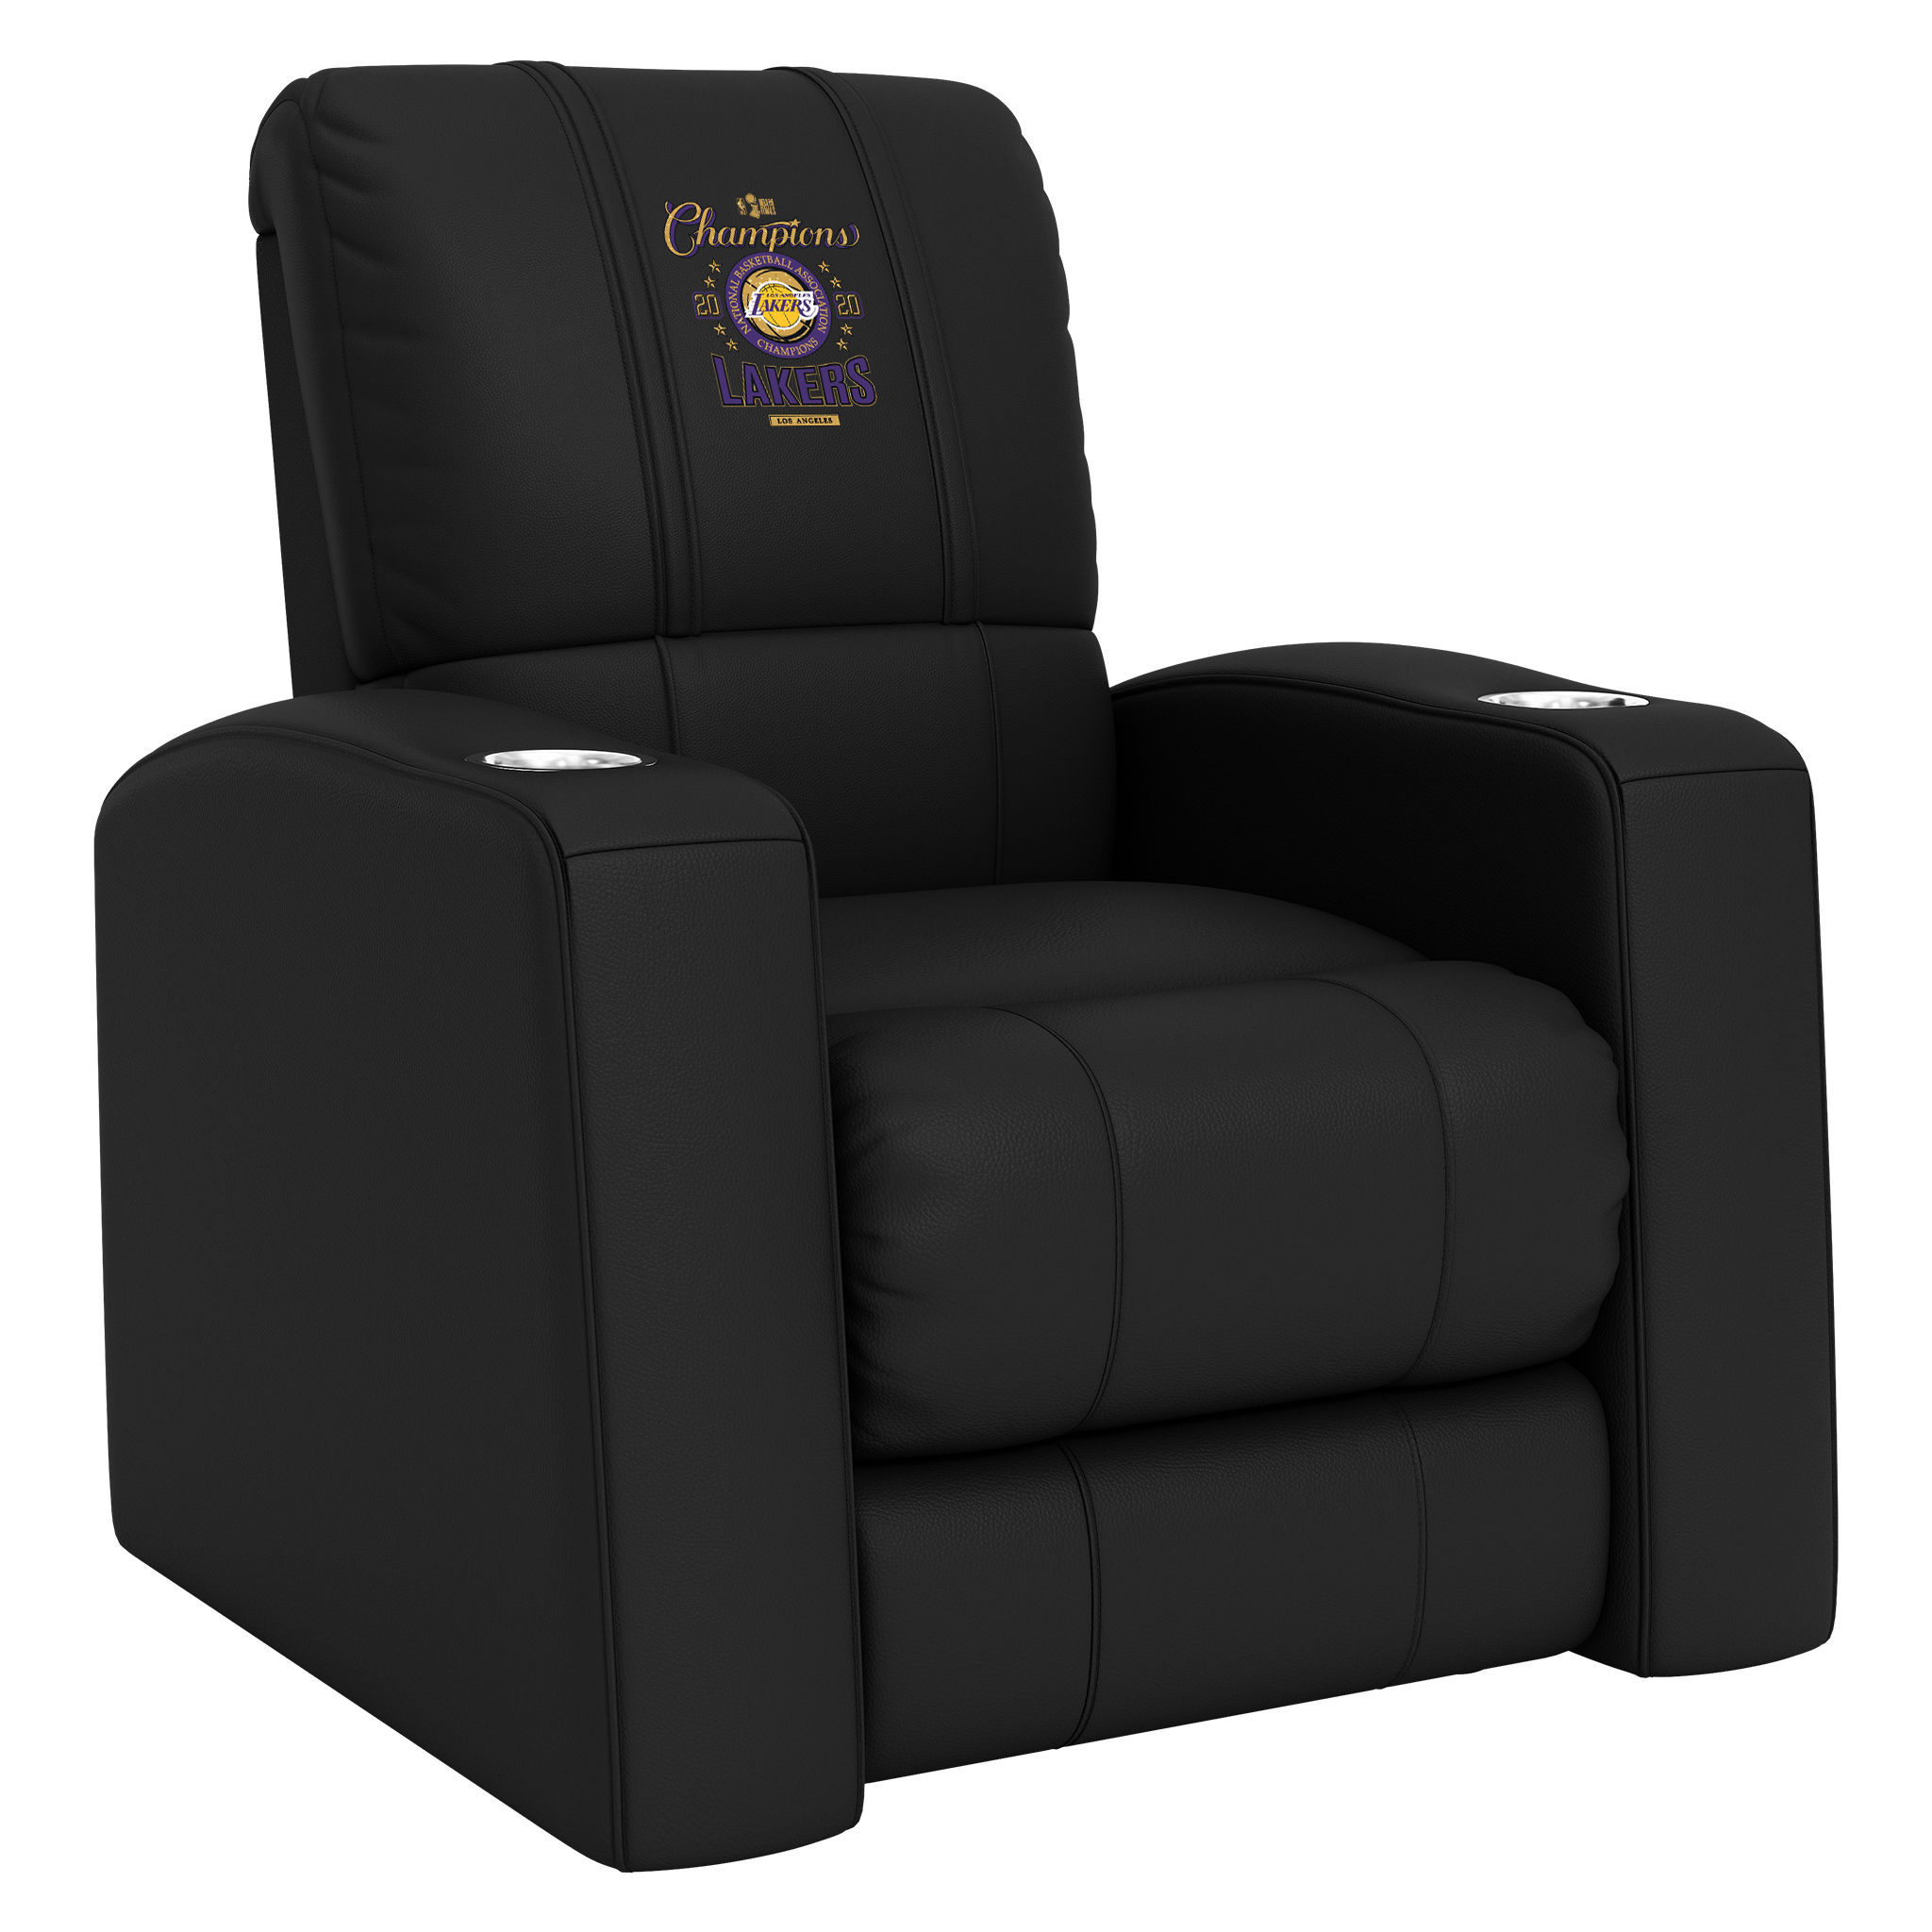 Los Angeles Lakers Home Theater Recliner with Los Angeles Lakers 2020 Champions Logo